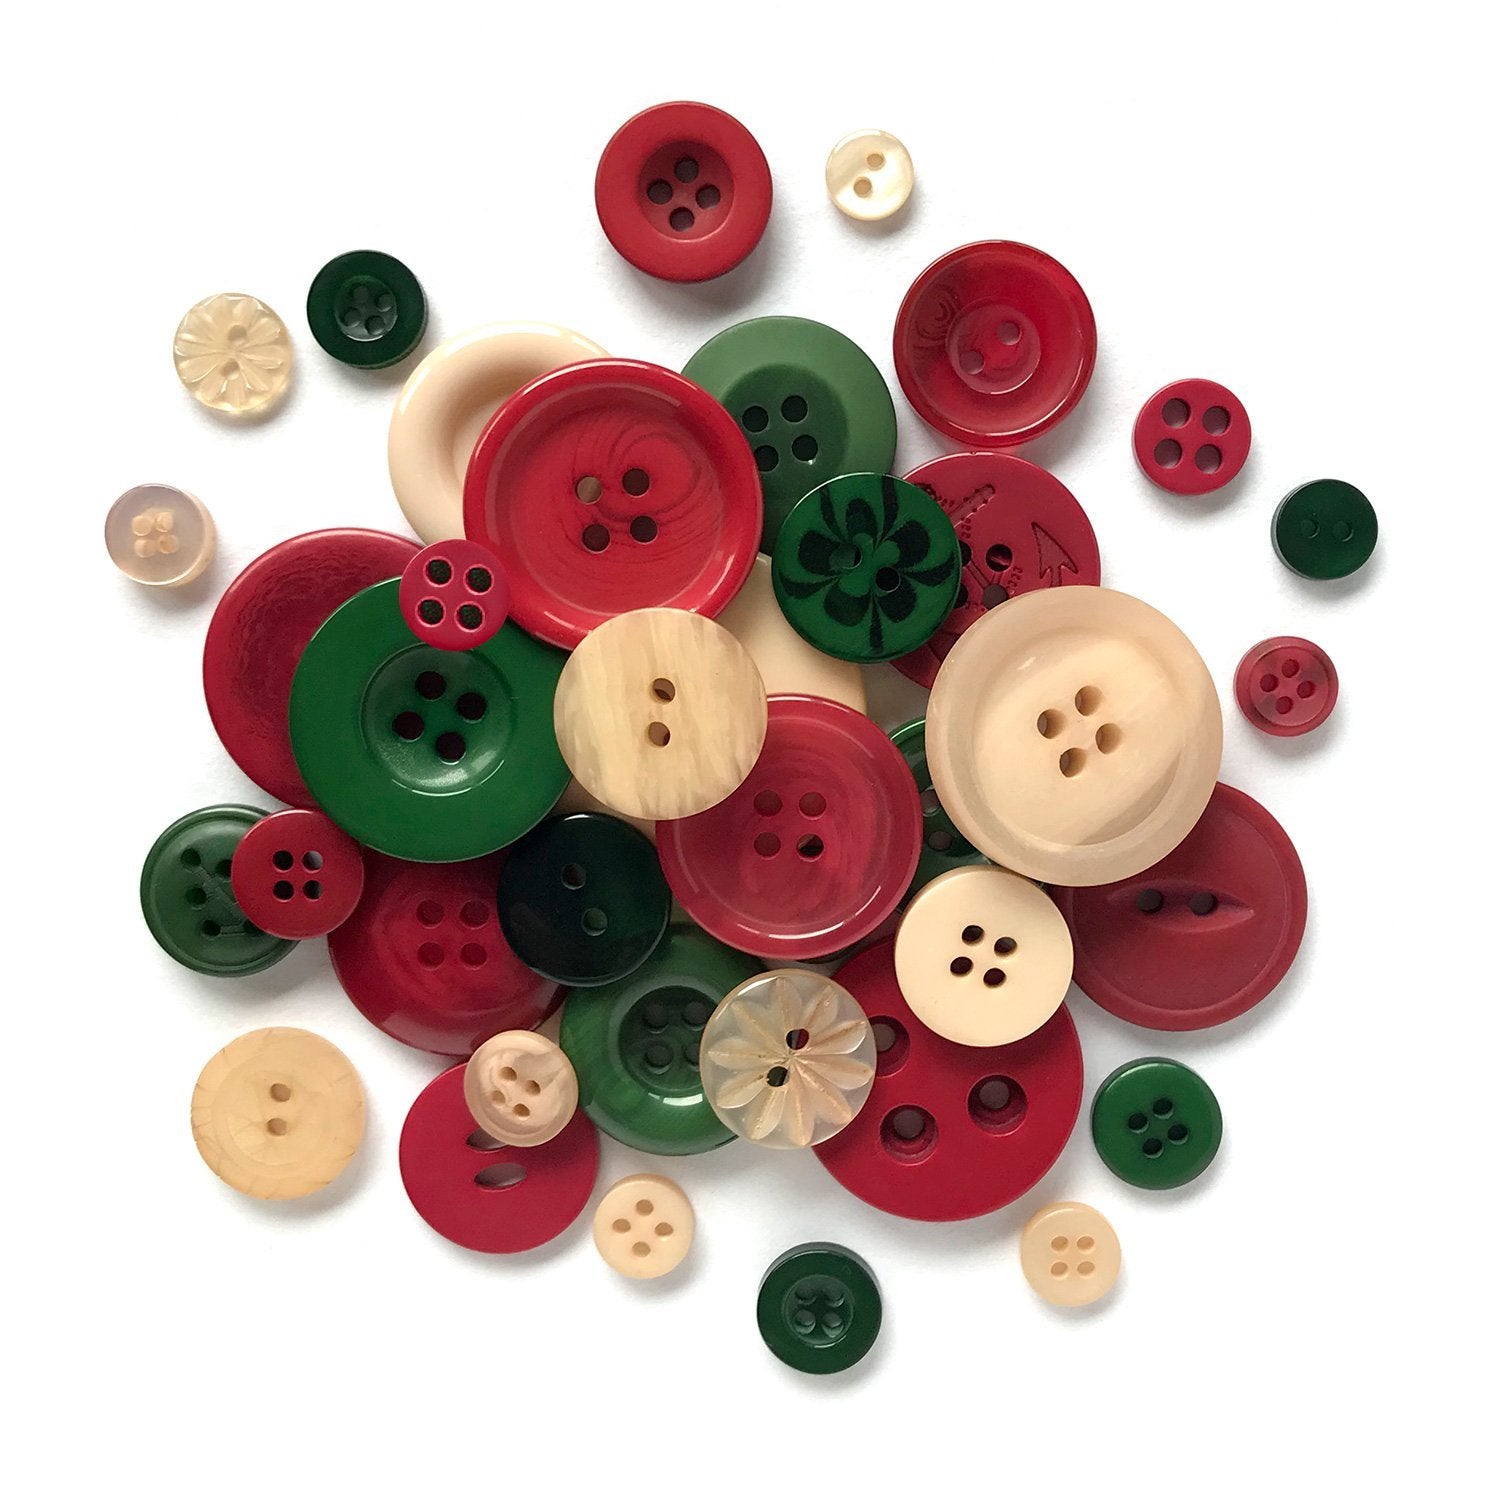 White Buttons for Crafts Sewing Scrapbooks and Quilts. Assorted sizes  including small white buttons| Buttons Galore and More